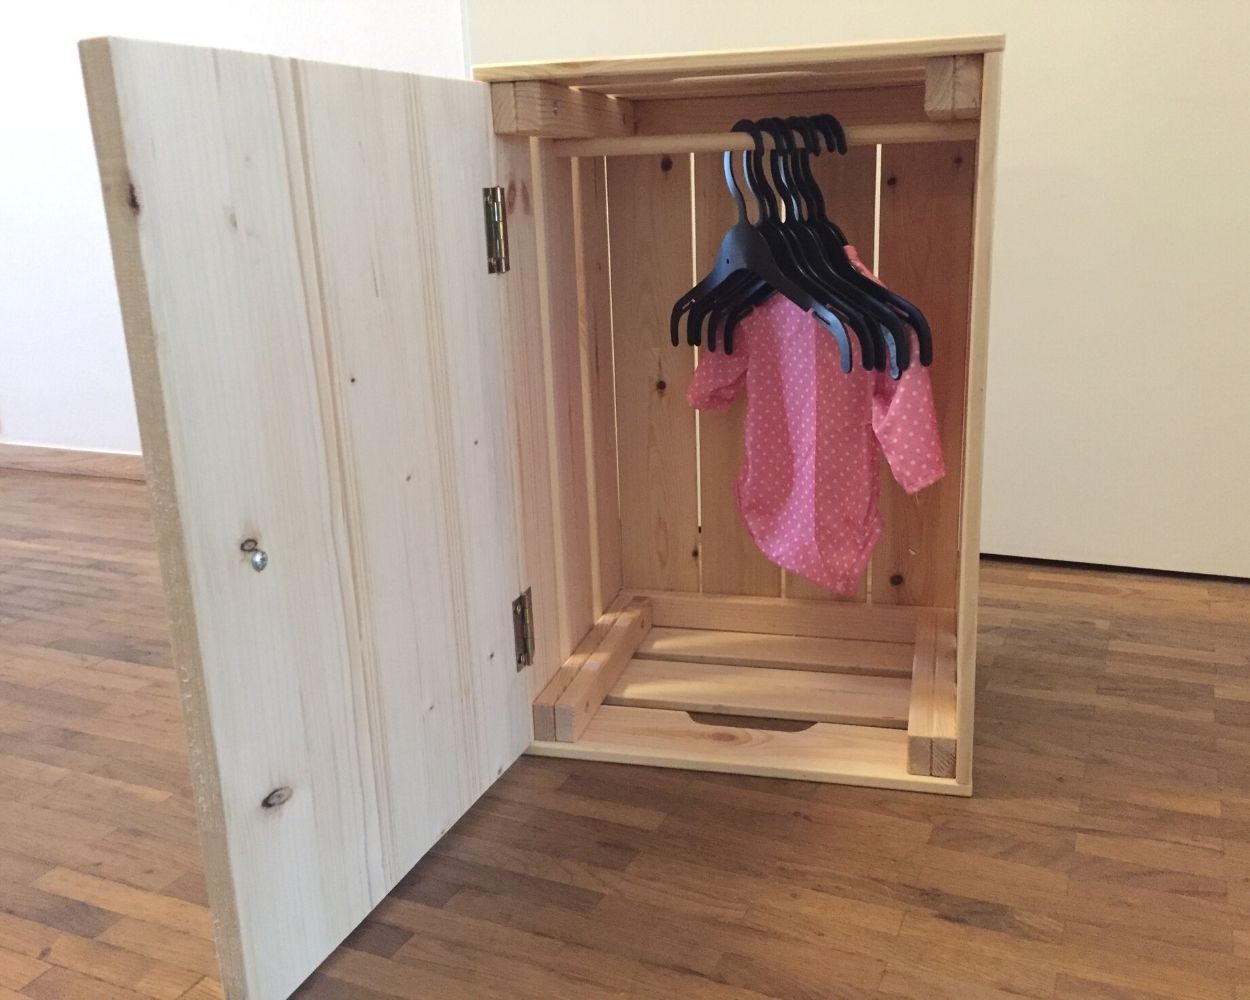 Build doll cabinet yourself from IKEA box